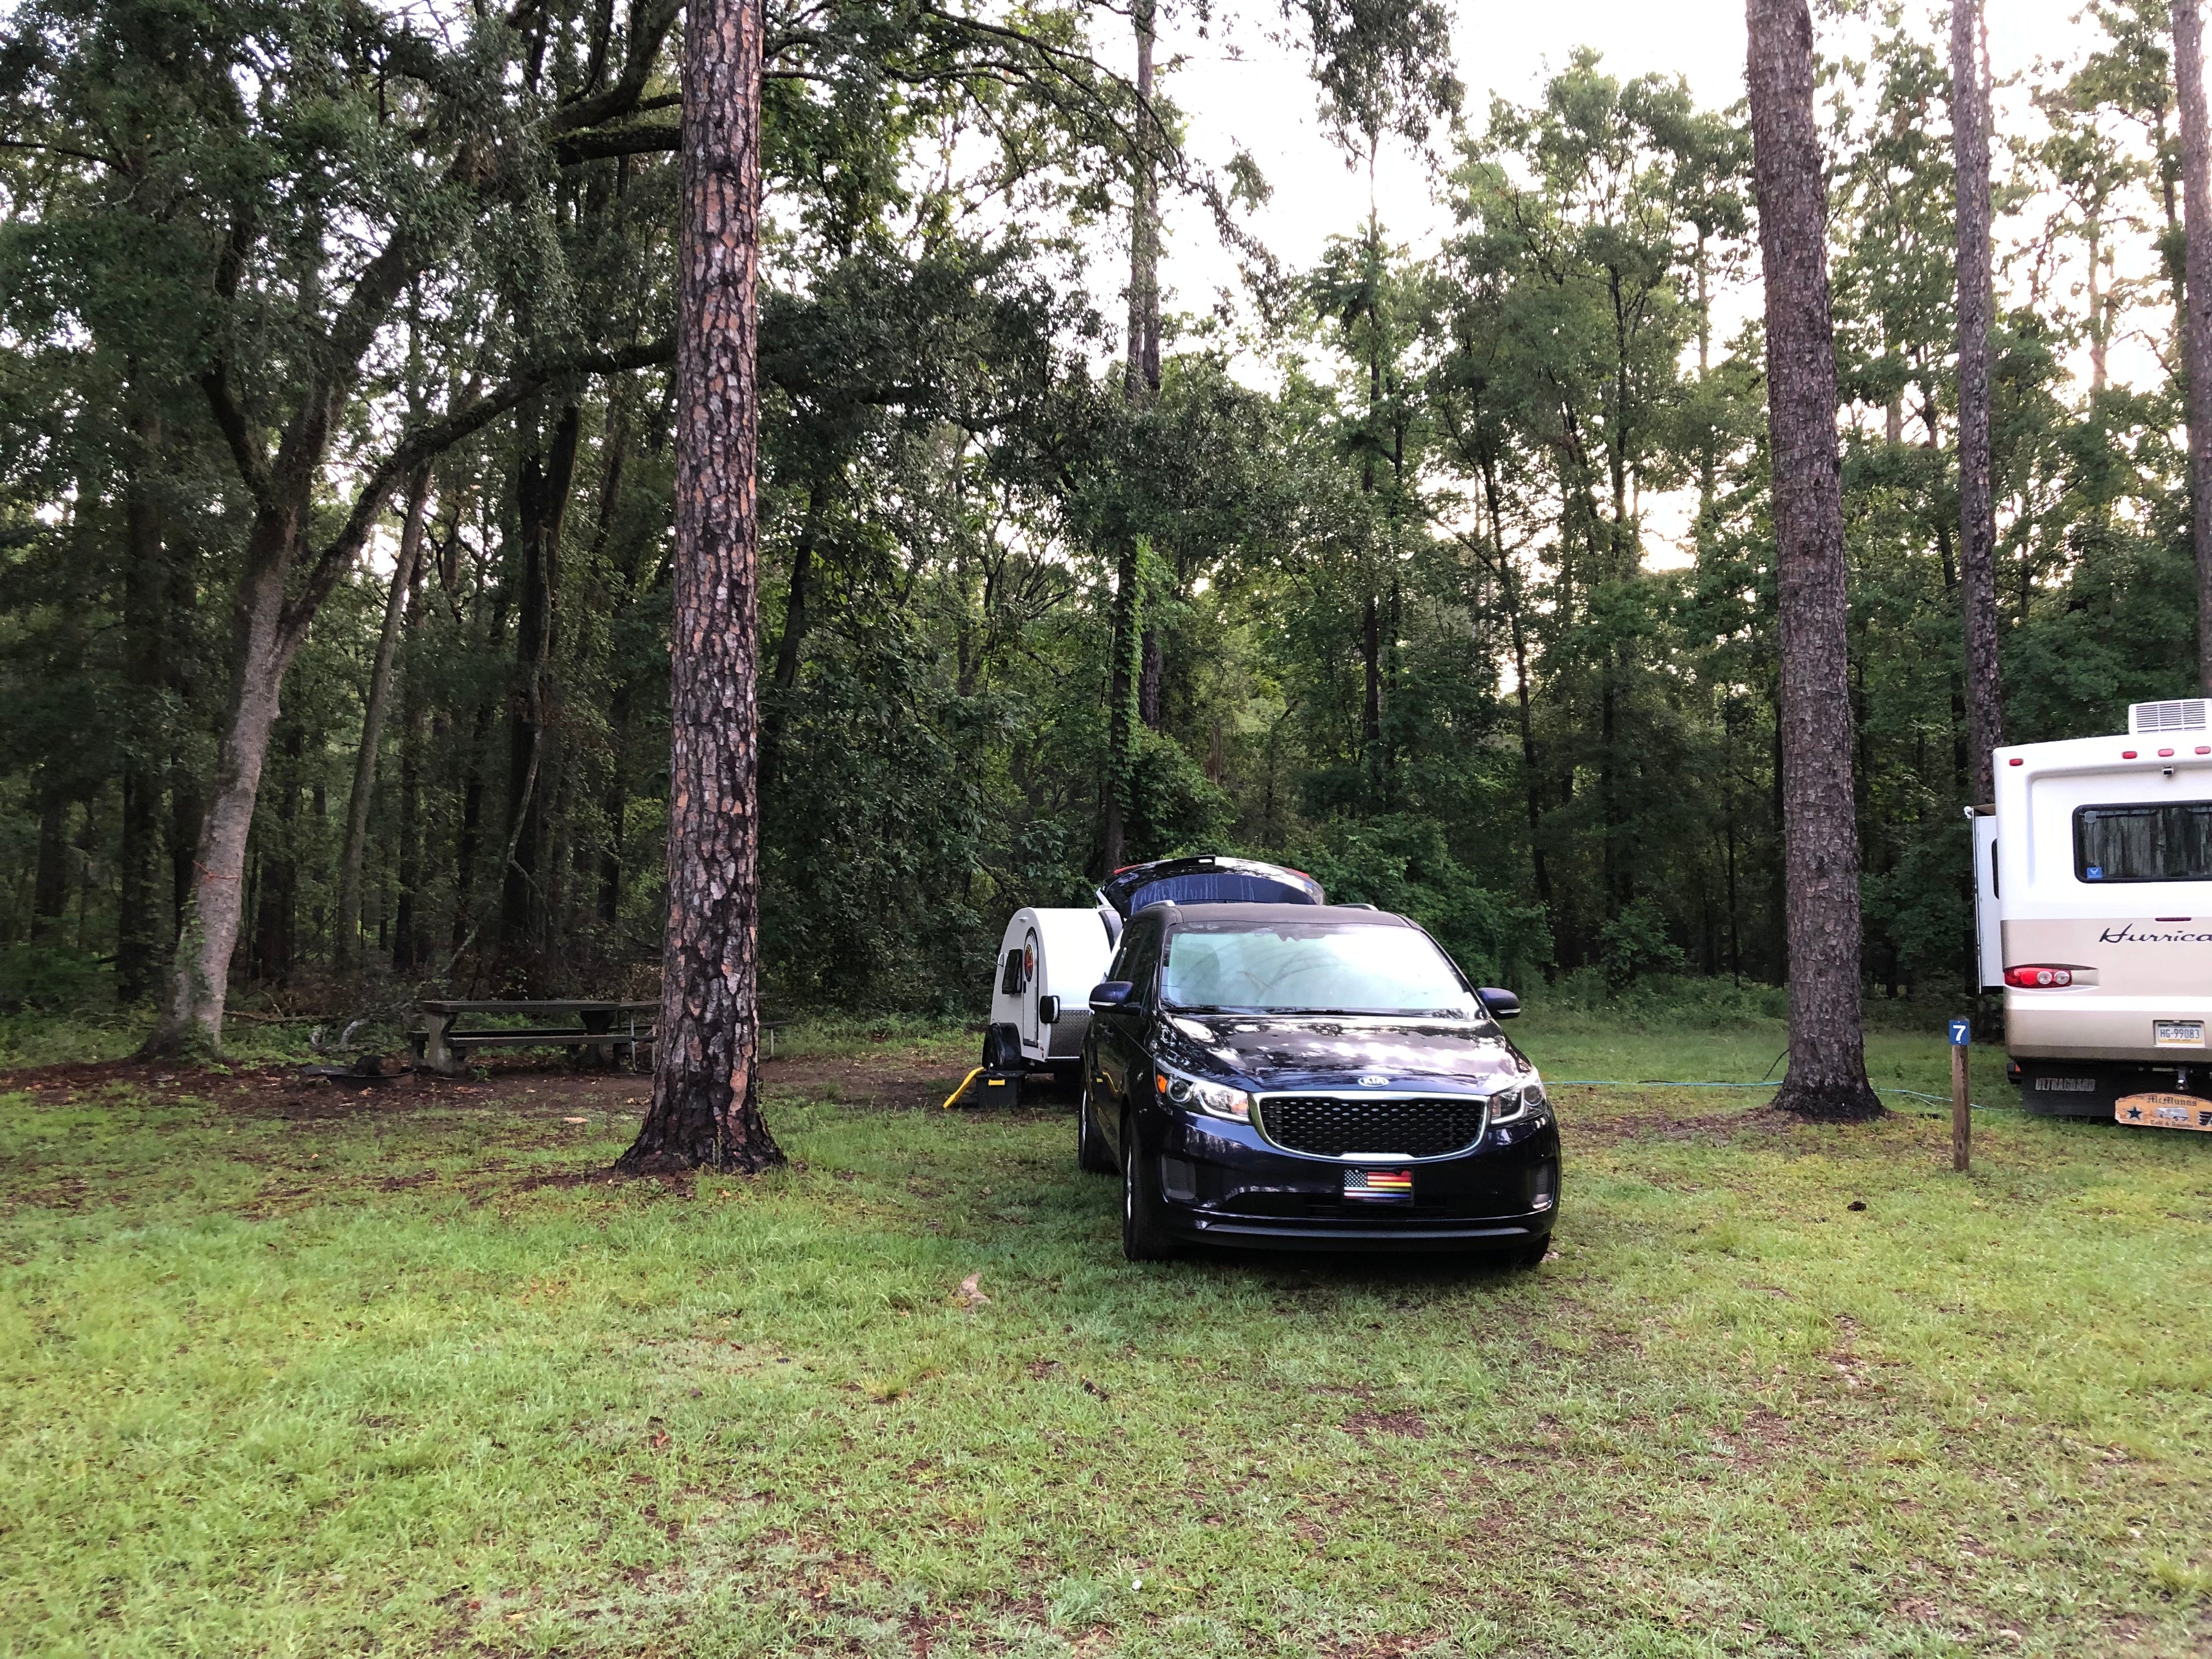 Camper submitted image from Chehaw Park Campground - 2